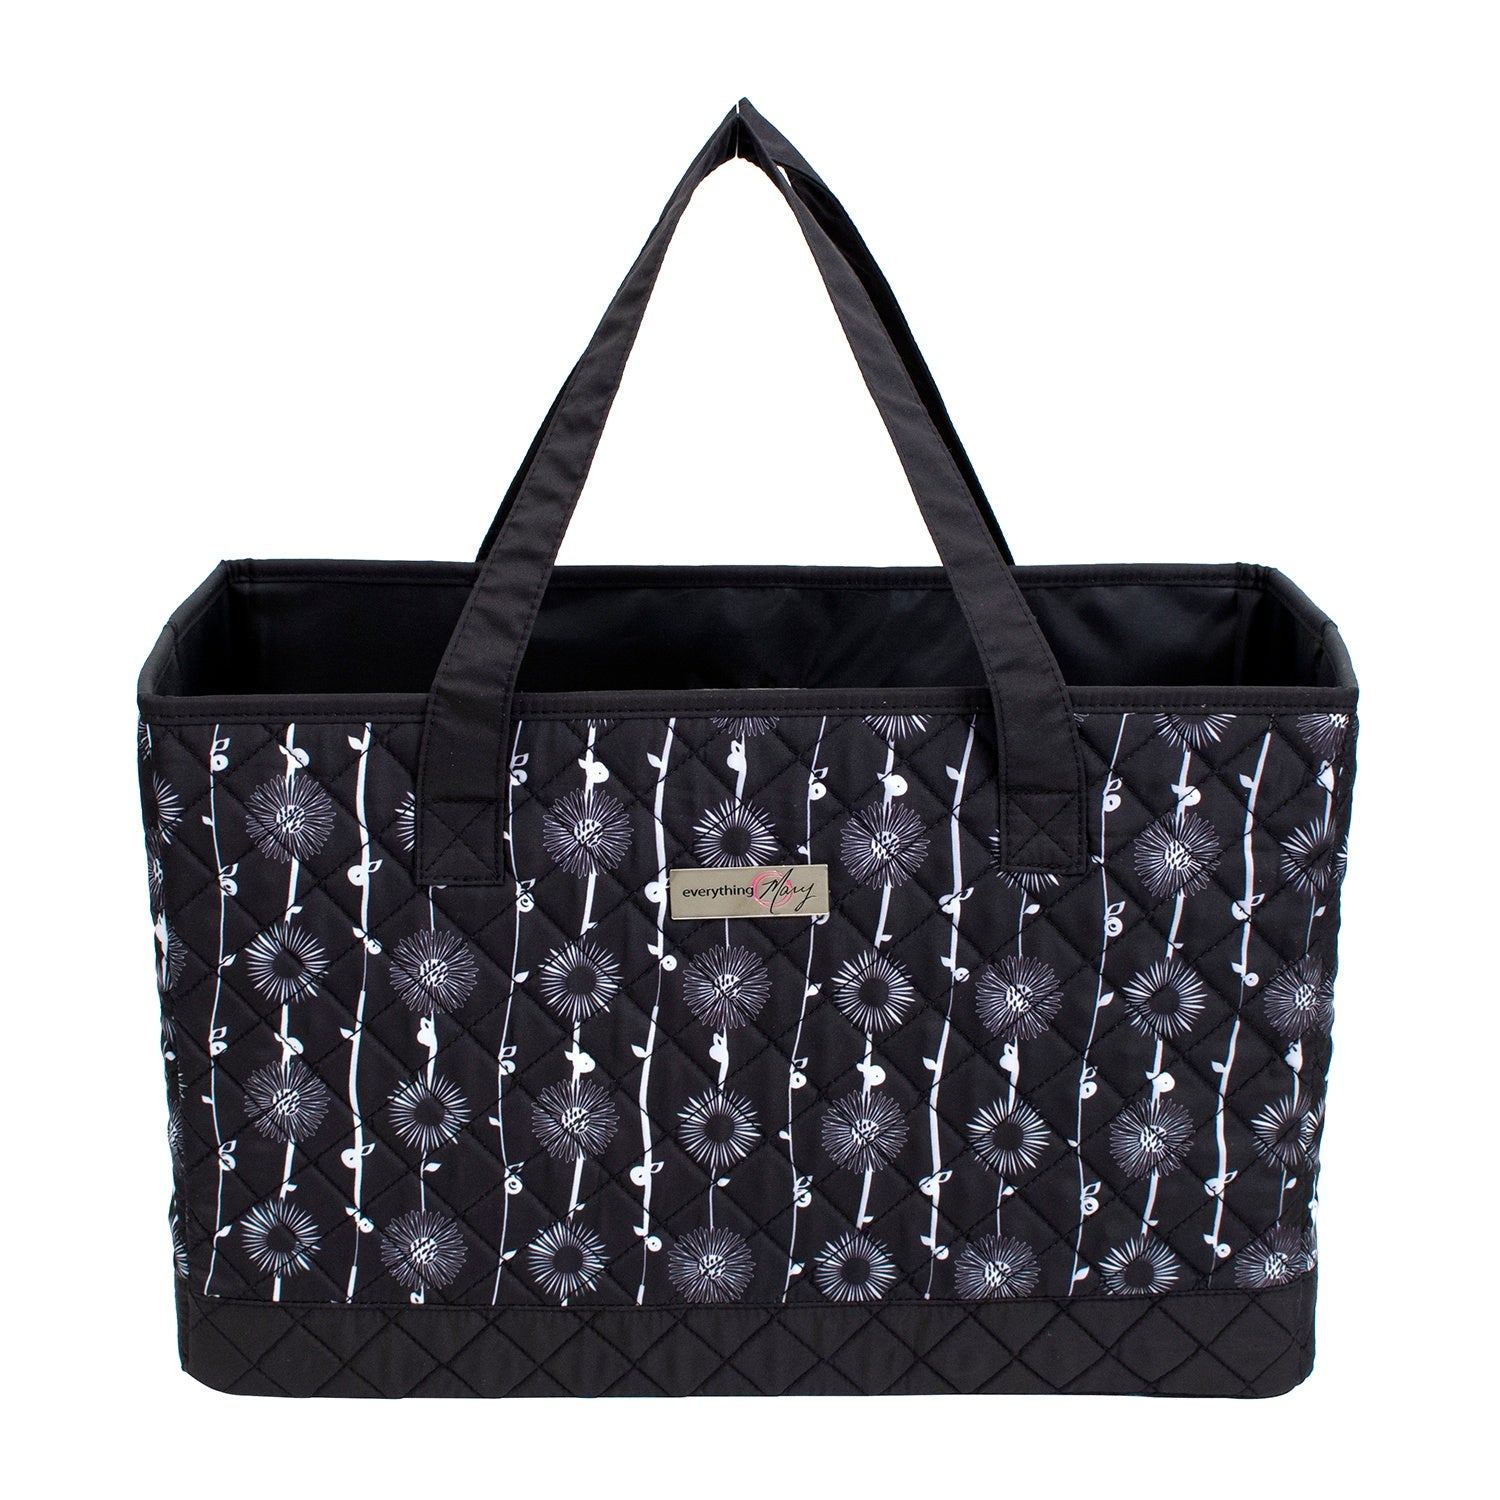 Sewing Machine Carry Tote, Black & White - Everything Mary